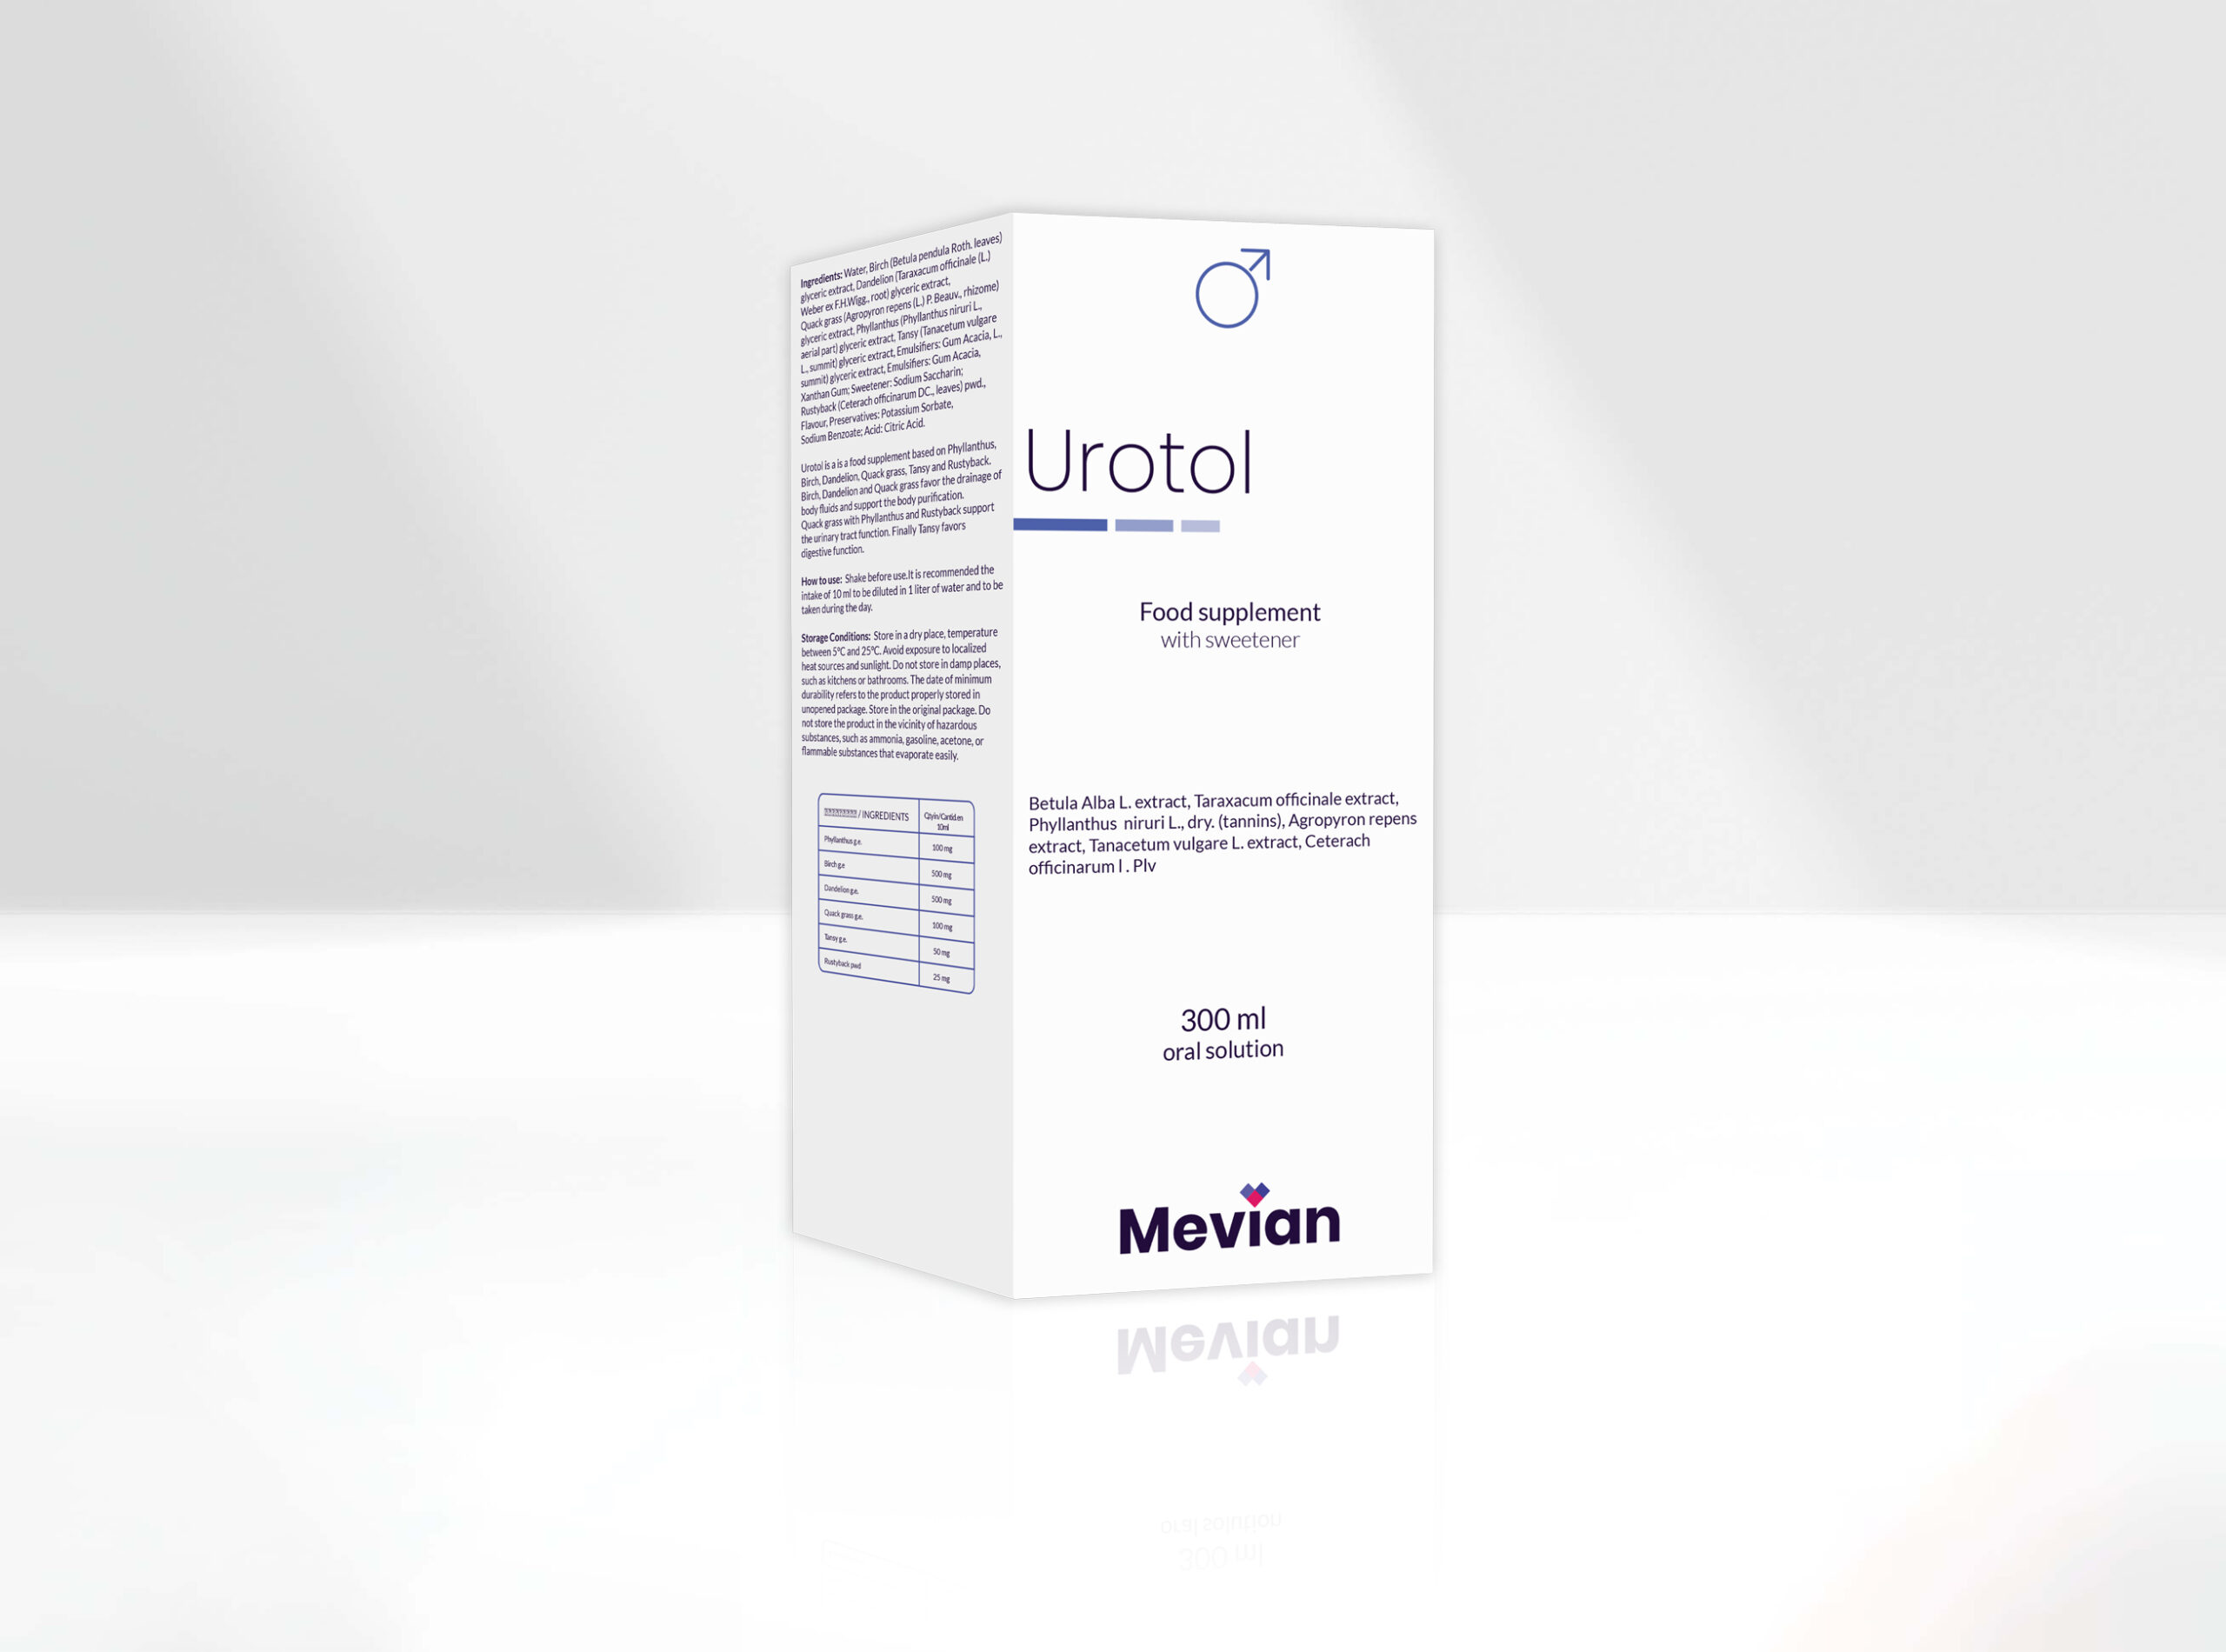 Urotol is ideal for Peripheral Oedemas that facilitates the drainage of body fluids and purifying functions of the body while supporting Urinary tract functionality.